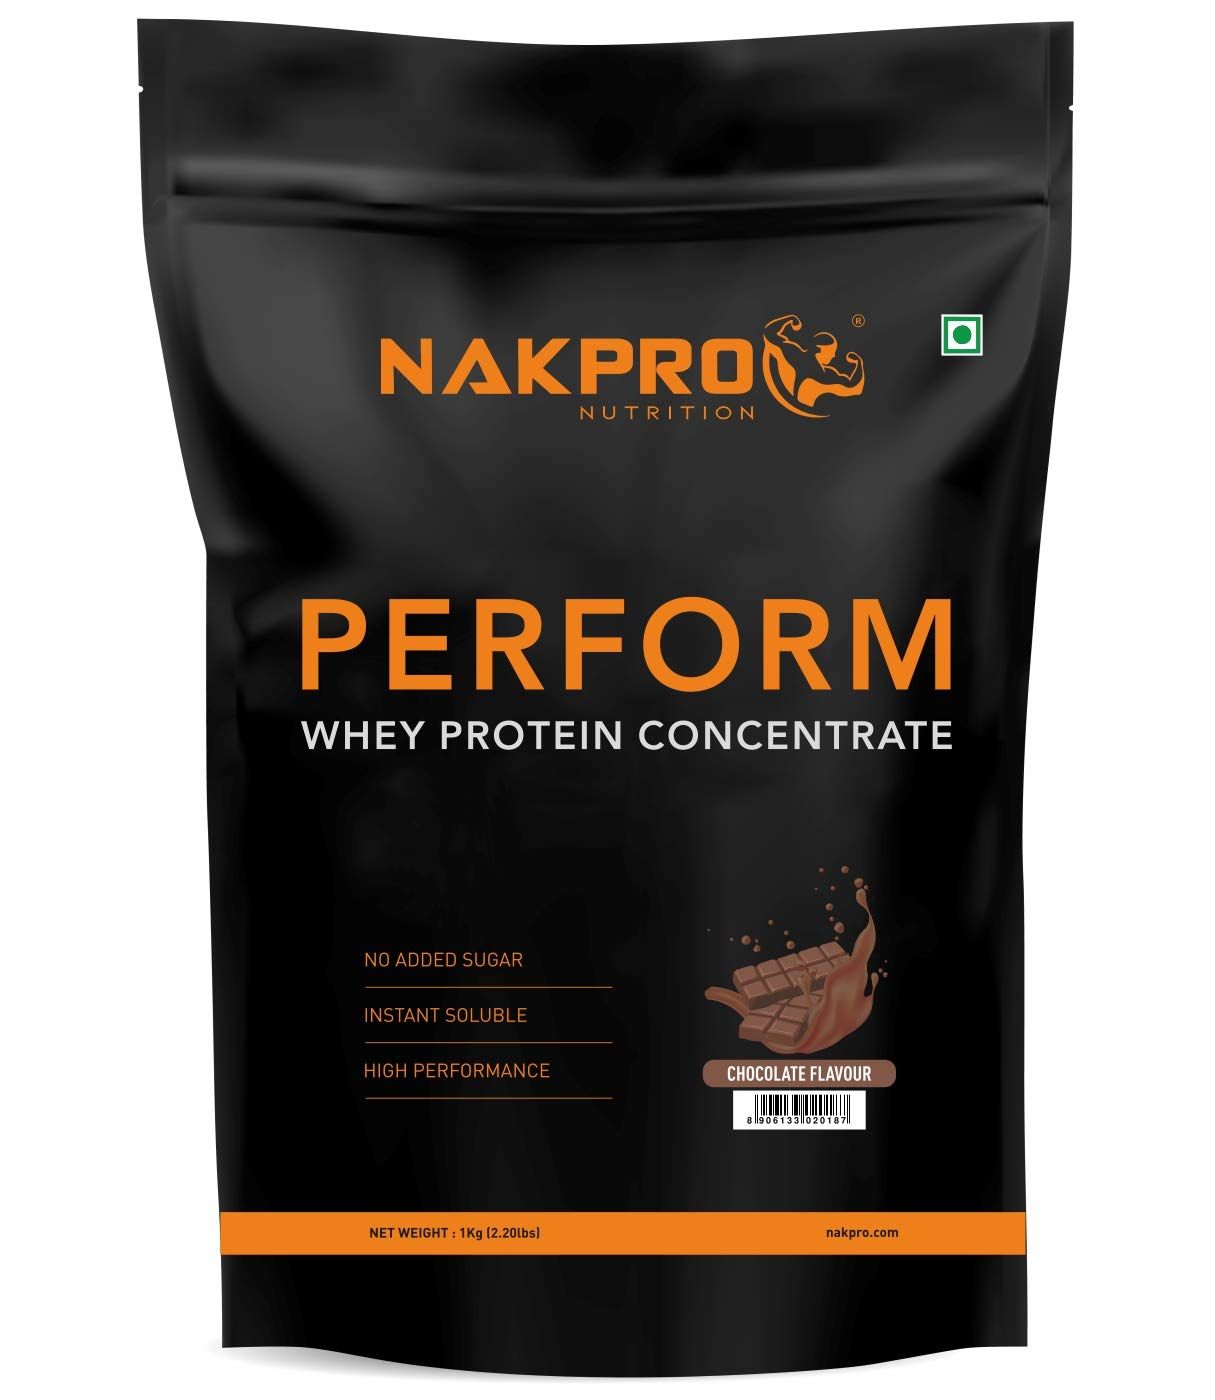 NAKPRO Perform Whey Protein Concentrate Image